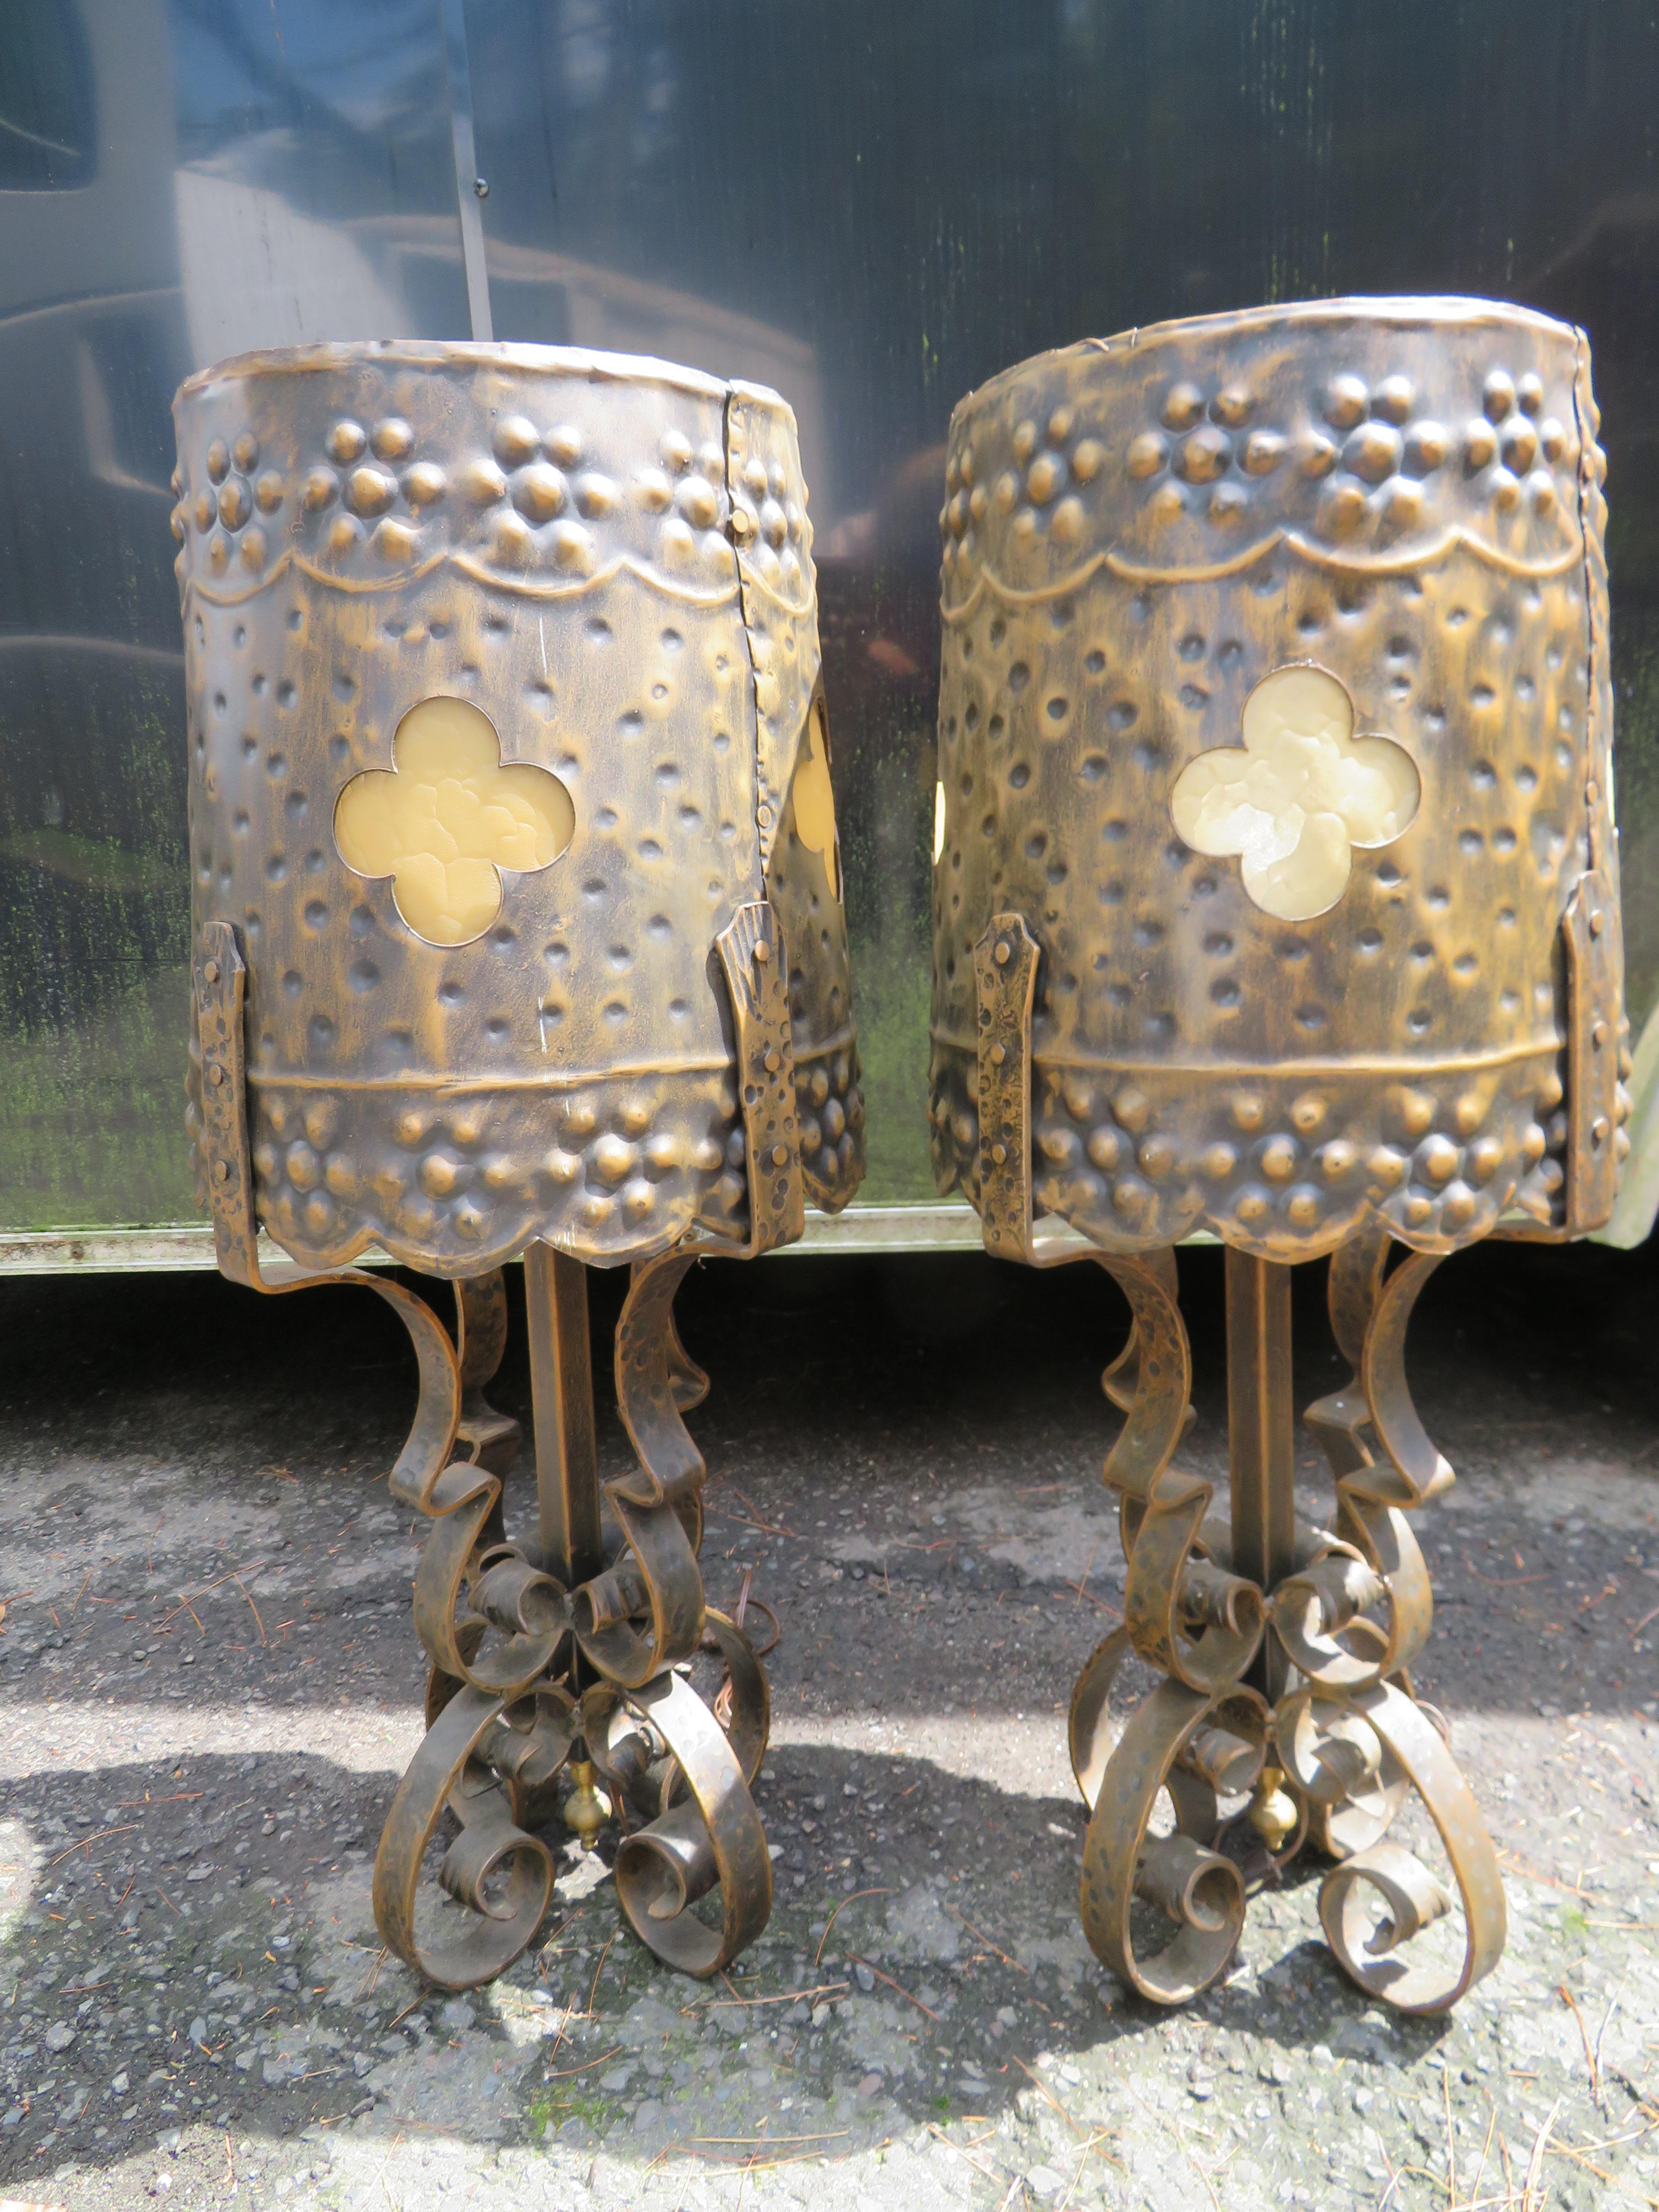 Monumental Brutalist Hammered Tudor Gothic Scroll Lamps Mid-Century Modern For Sale 9